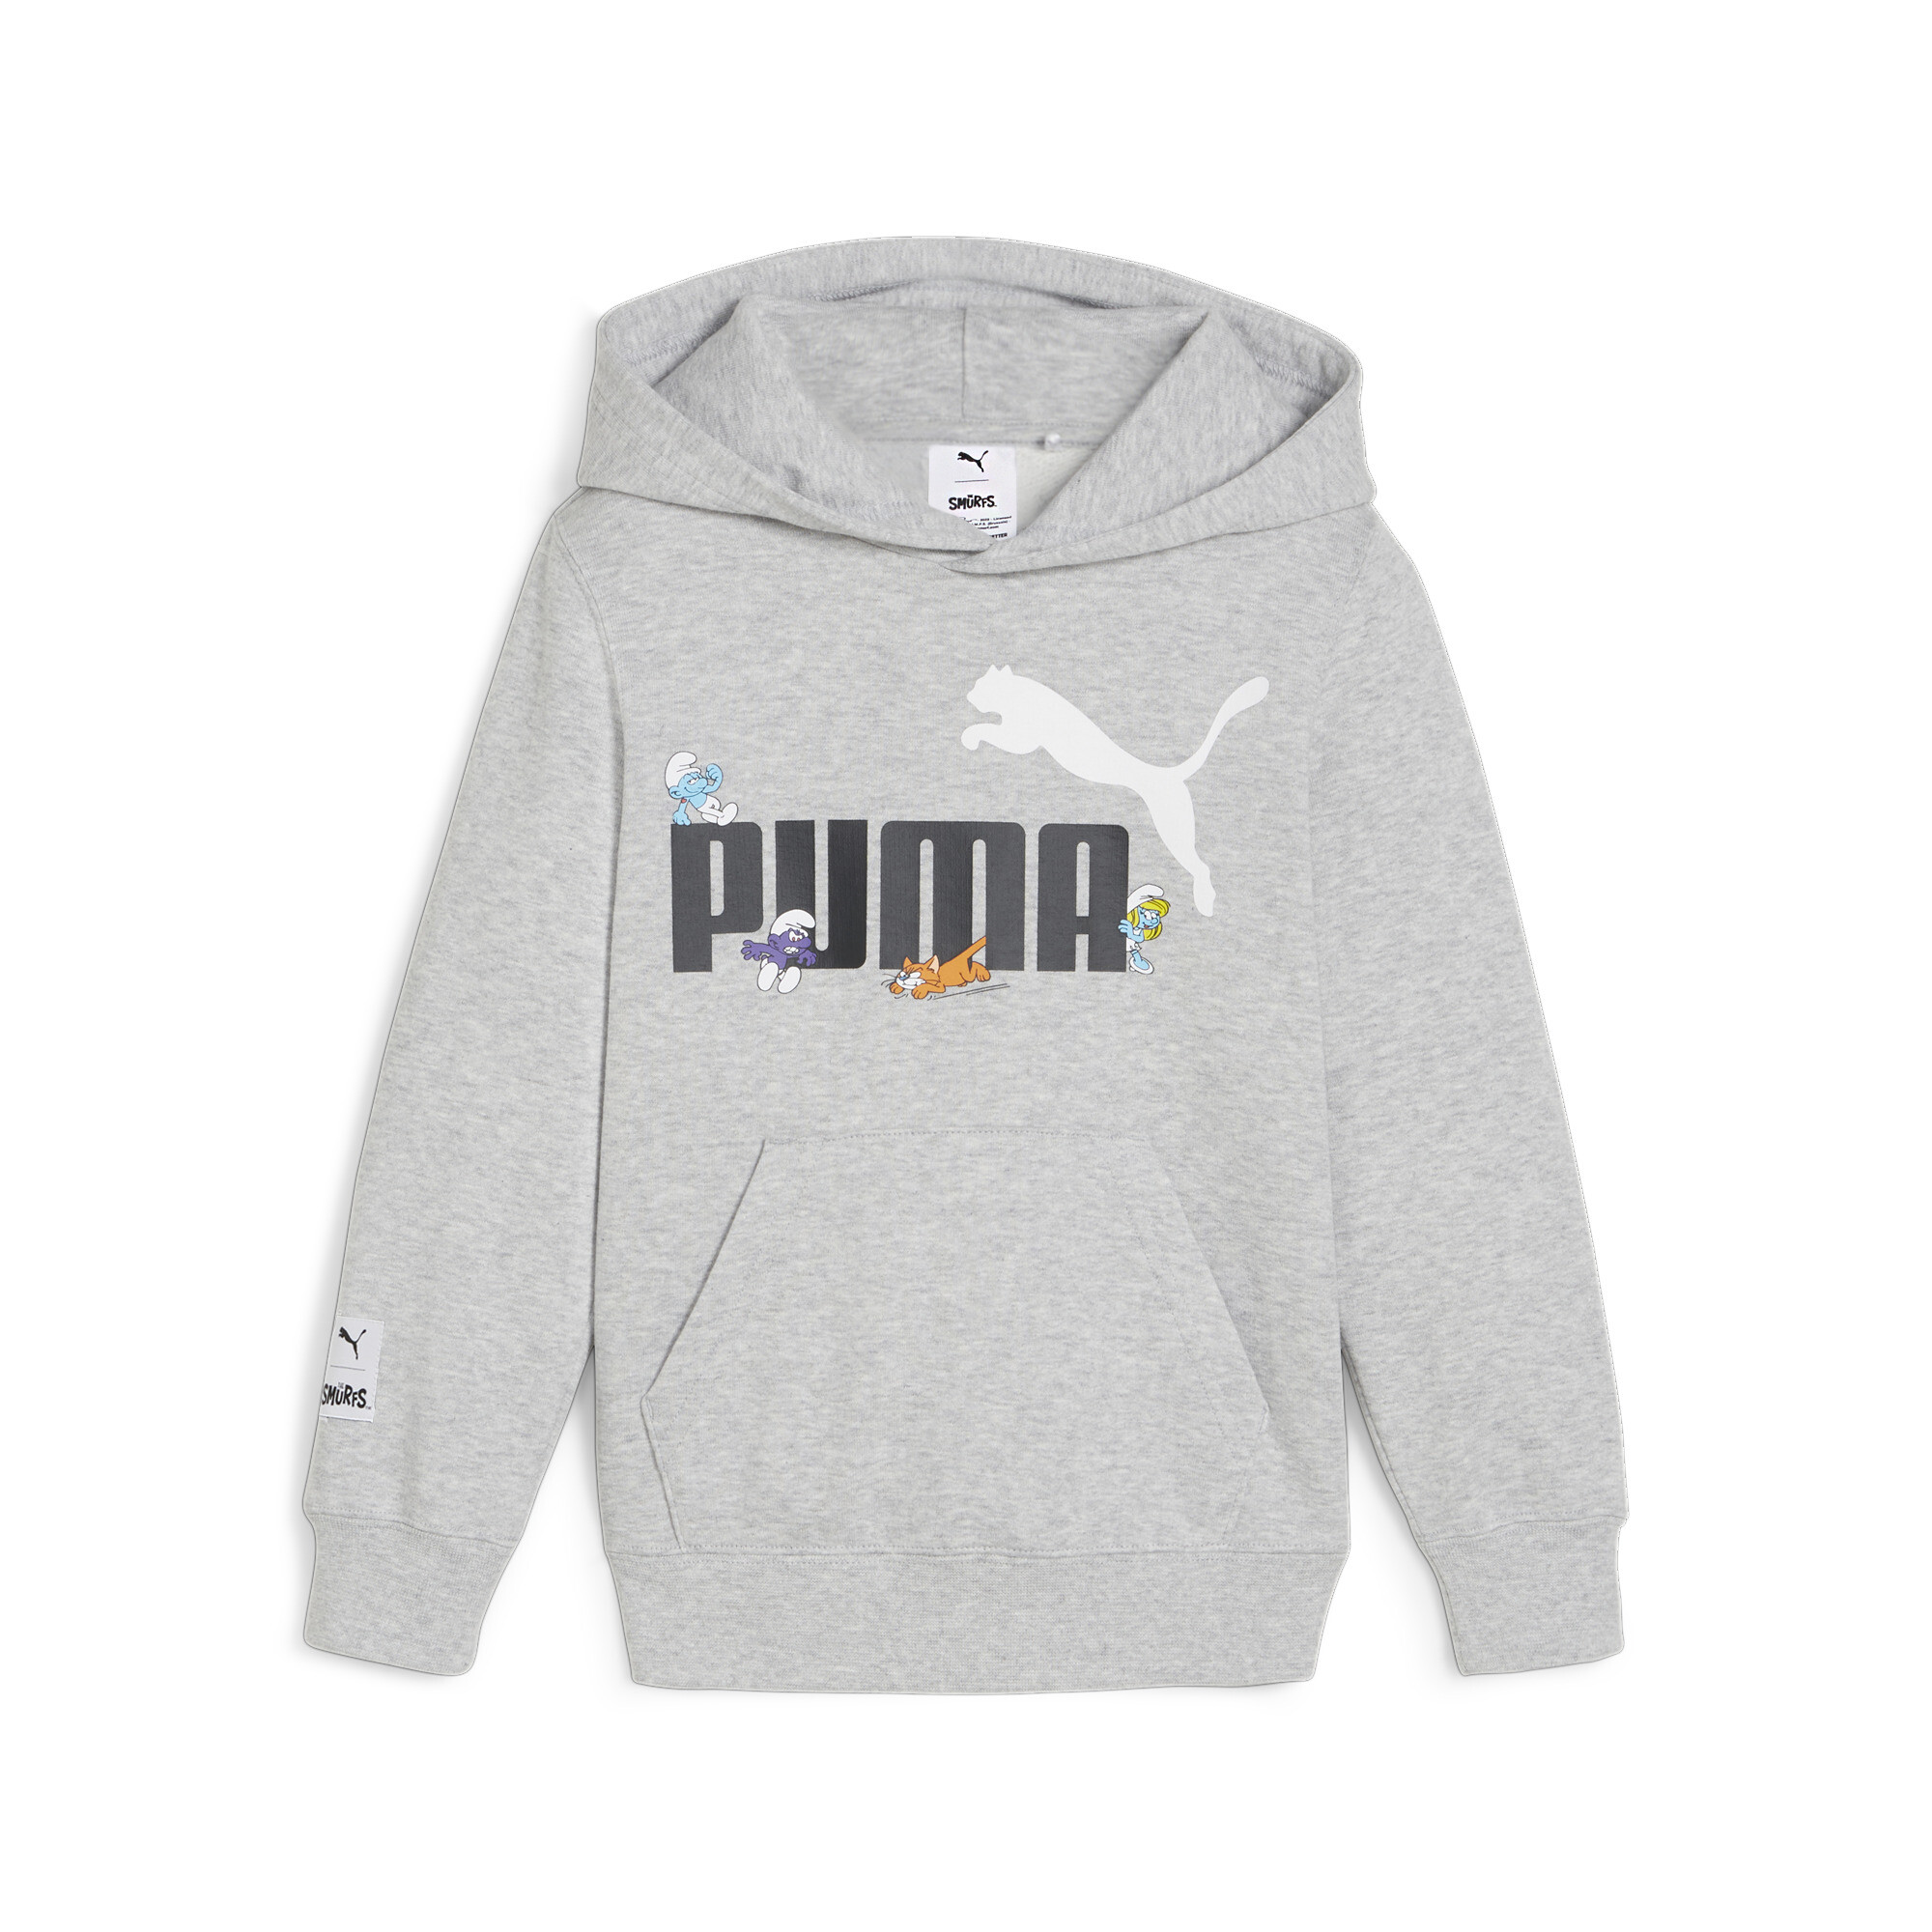 PUMA X THE SMURFS Hoodie In Heather, Size 11-12 Youth